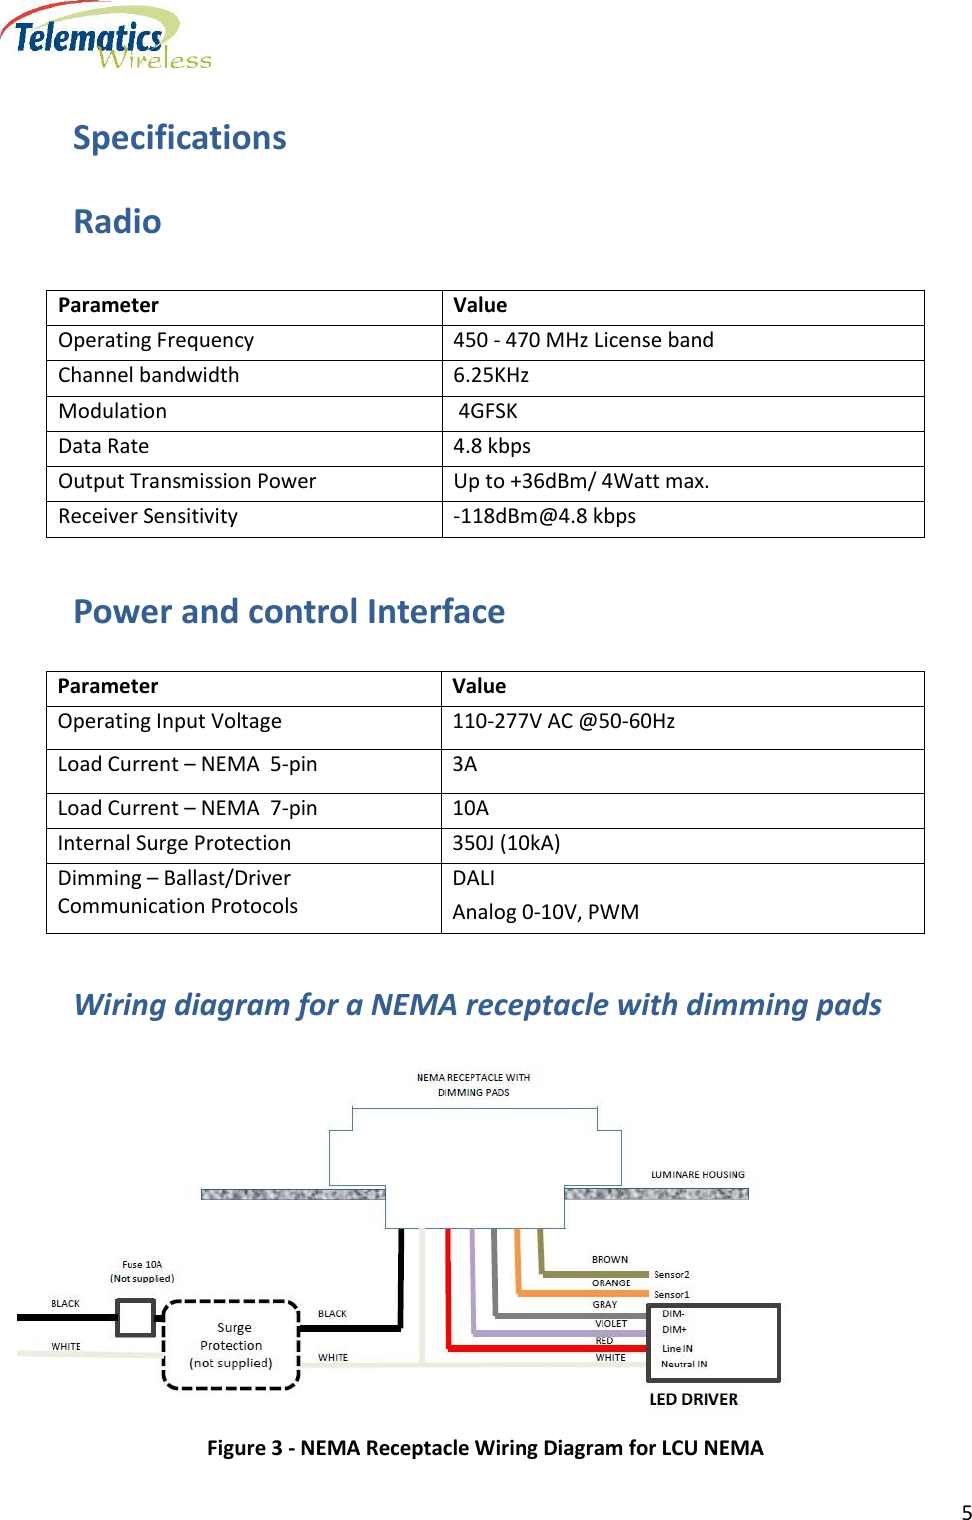      5  Specifications Radio Power and control Interface Parameter Value Operating Input Voltage 110-277V AC @50-60Hz  Load Current – NEMA  5-pin 3A Load Current – NEMA  7-pin 10A Internal Surge Protection 350J (10kA) Dimming – Ballast/Driver Communication Protocols DALI Analog 0-10V, PWM Wiring diagram for a NEMA receptacle with dimming pads  Figure 3 - NEMA Receptacle Wiring Diagram for LCU NEMA Parameter Value Operating Frequency 450 - 470 MHz License band Channel bandwidth 6.25KHz Modulation  4GFSK Data Rate 4.8 kbps Output Transmission Power  Up to +36dBm/ 4Watt max. Receiver Sensitivity  -118dBm@4.8 kbps 